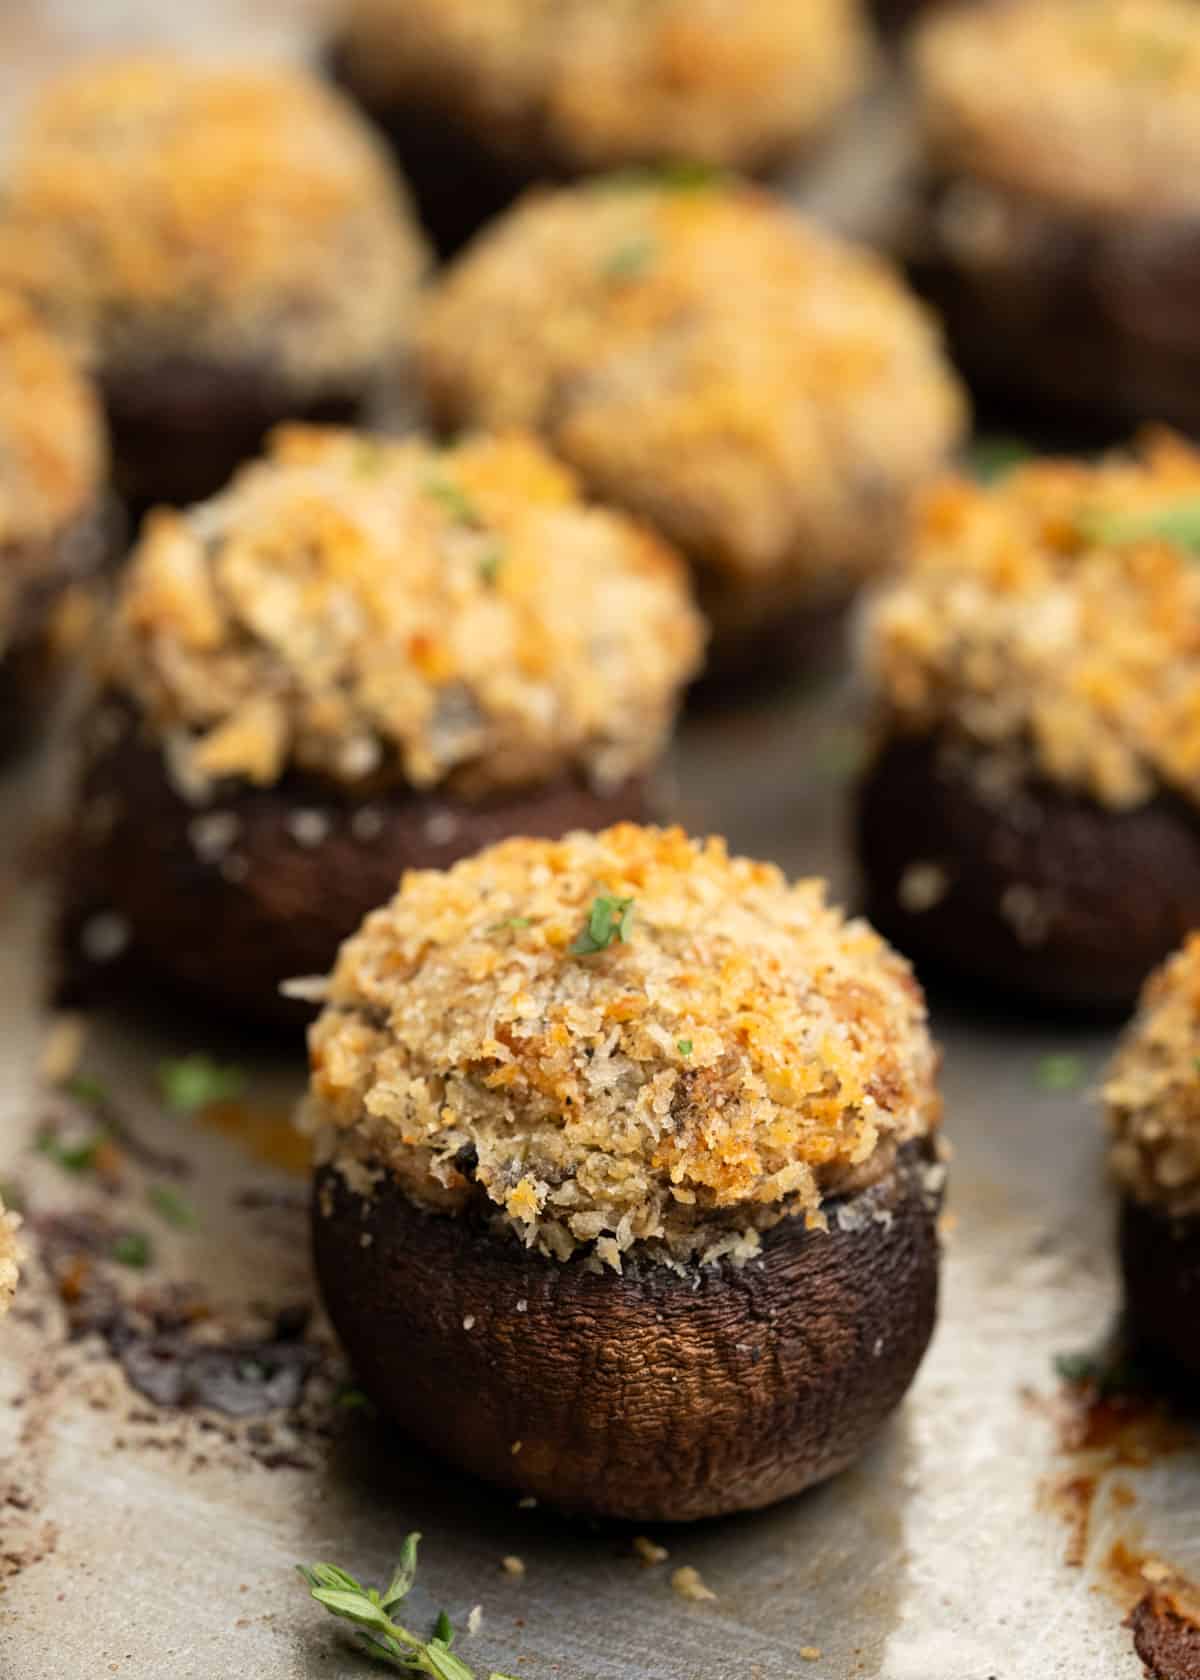 Baked Cremini mushrooms are stuffed with savoury filling of cream cheese, walnuts, fresh herbs and then topped crunchy breadcrumb parmesan topping. 